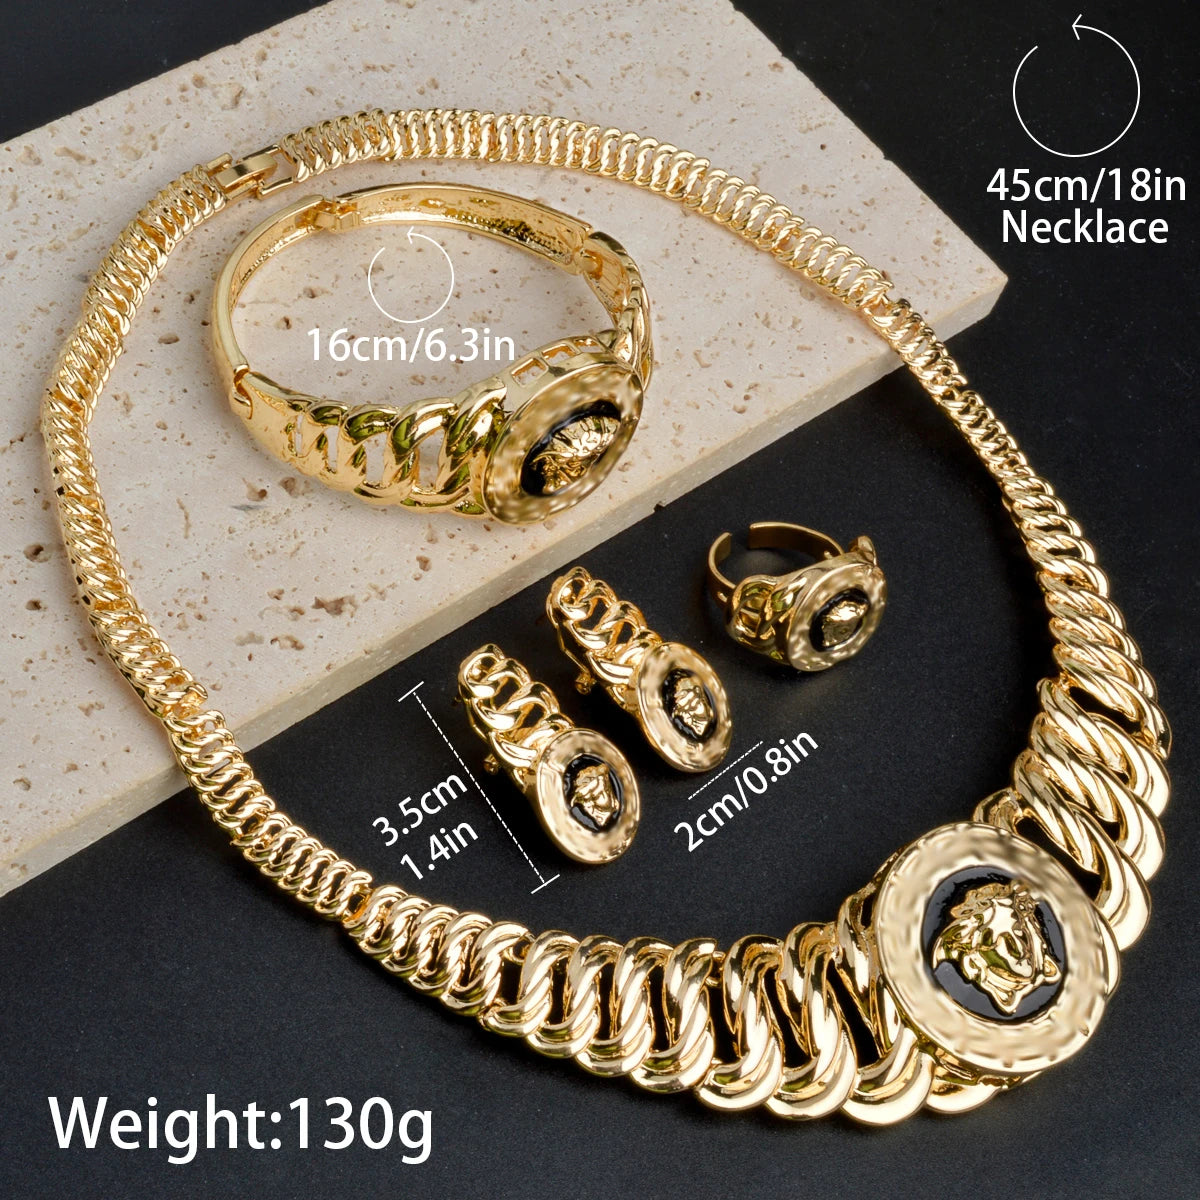 Dubai Luxury Jewelry Set for Women Gold Plated Lion Necklace